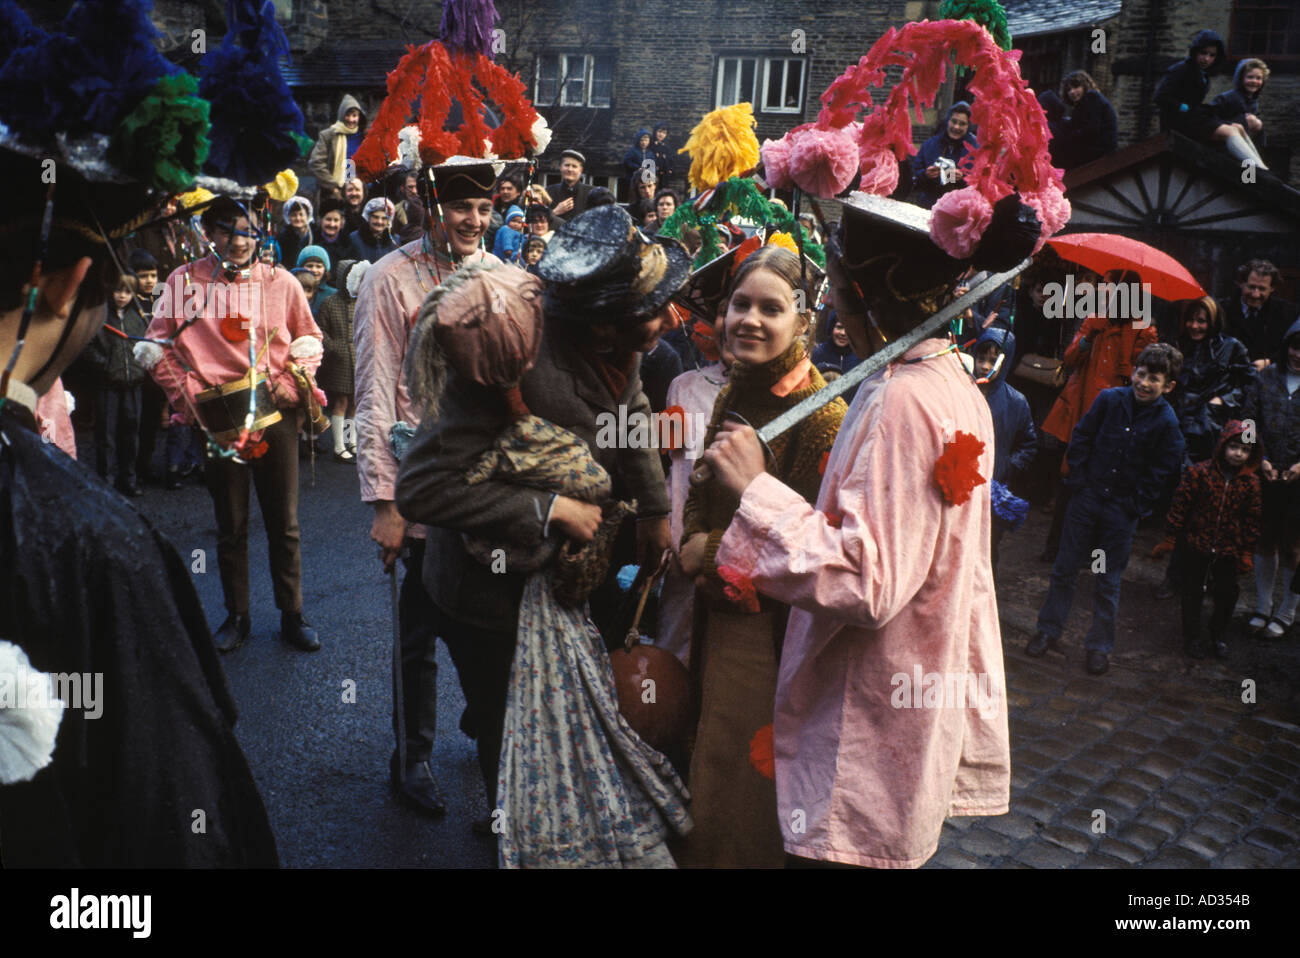 Midgley Pace Egging play Midgley Yorkshire annual Easter tradition 1970s UK Performed by local school children who keep the custom alive HOMER SYKES Stock Photo